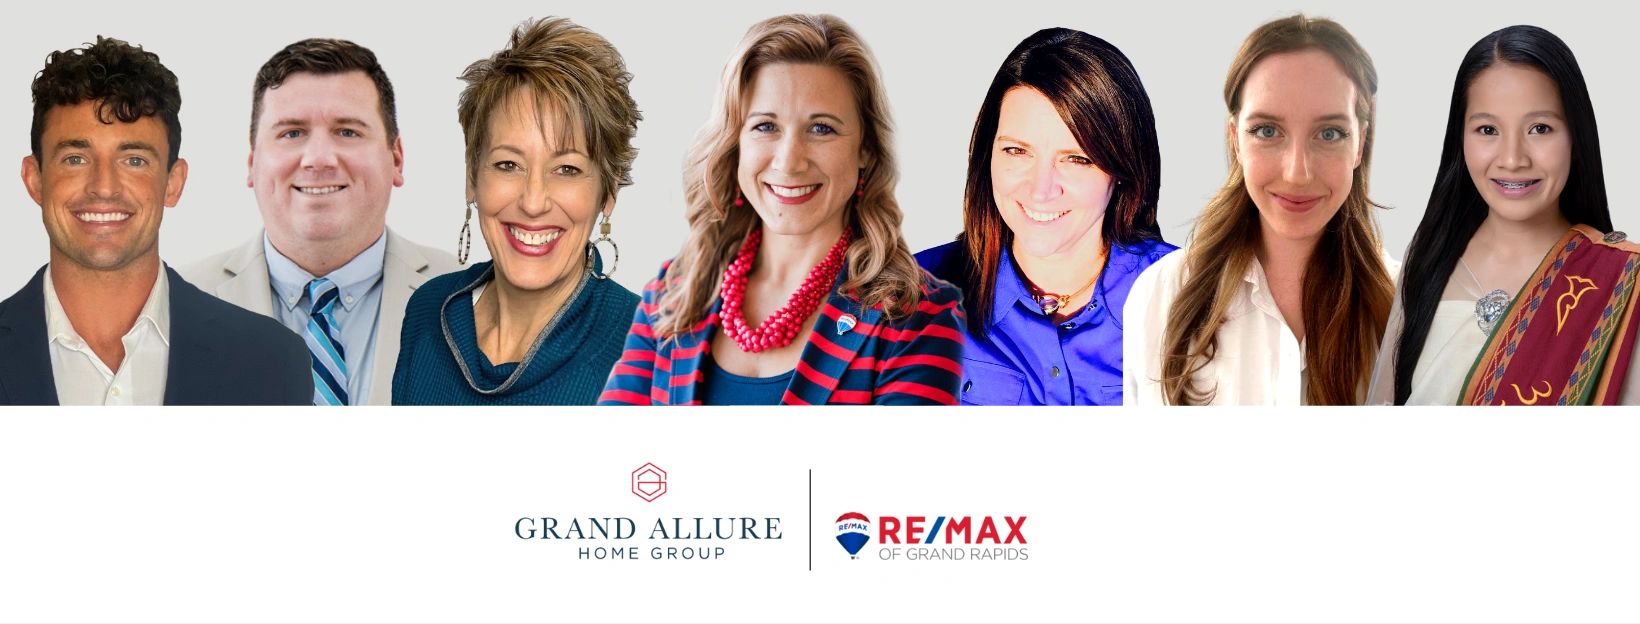 Grand Allure Home Group Team photo 